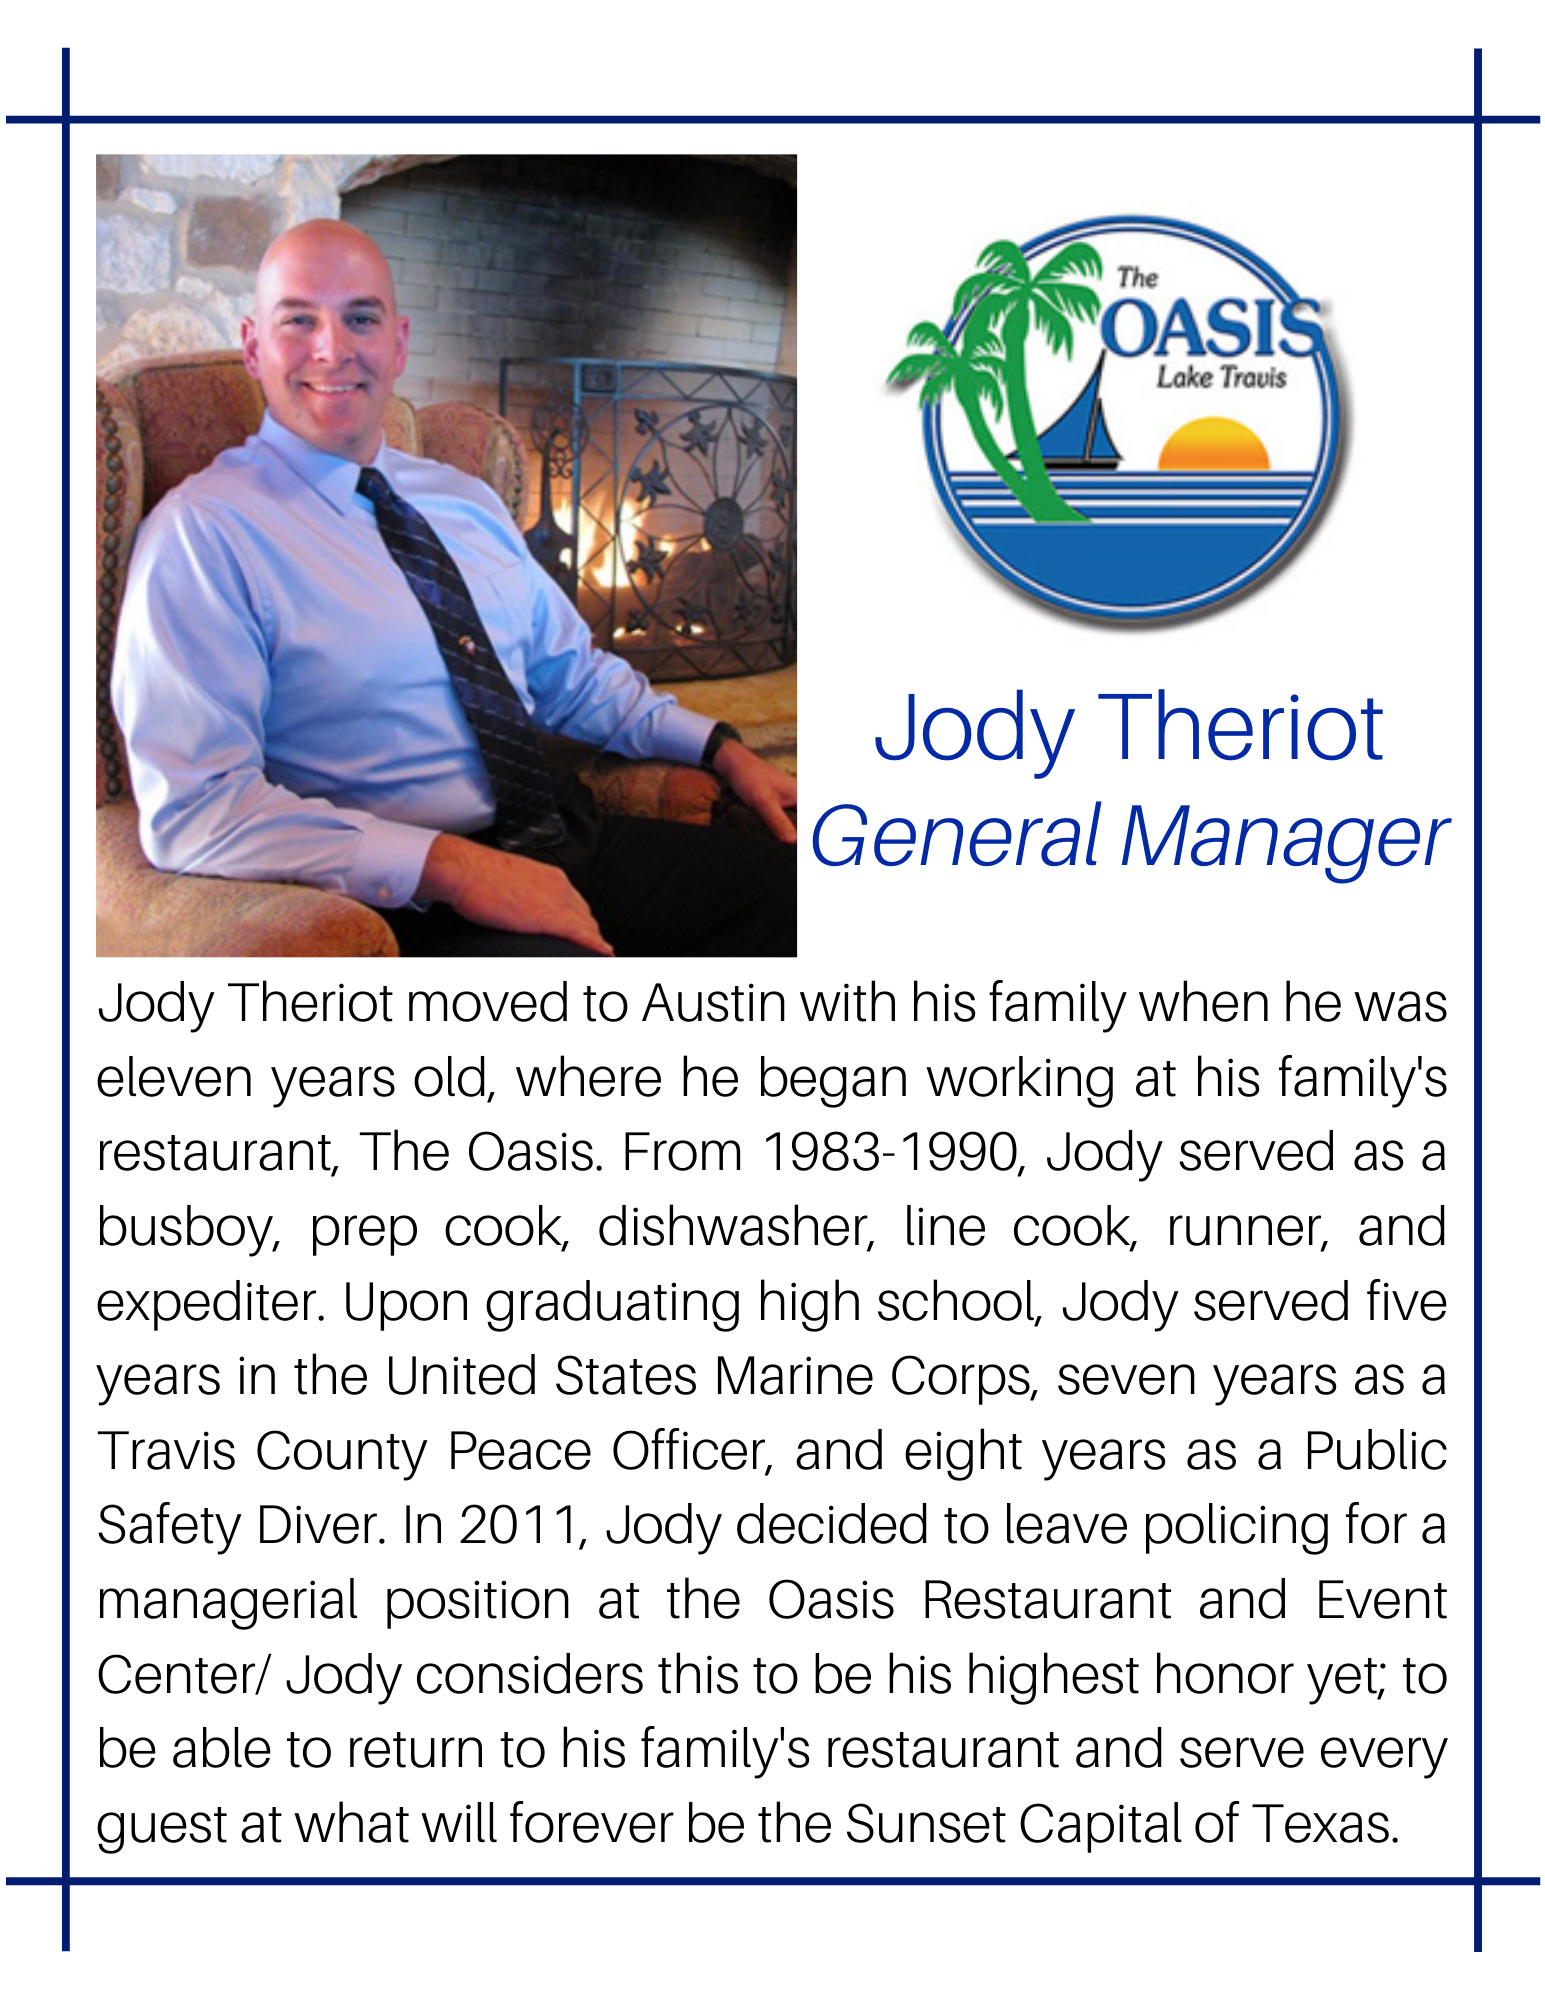 General Manager Jody Theriot